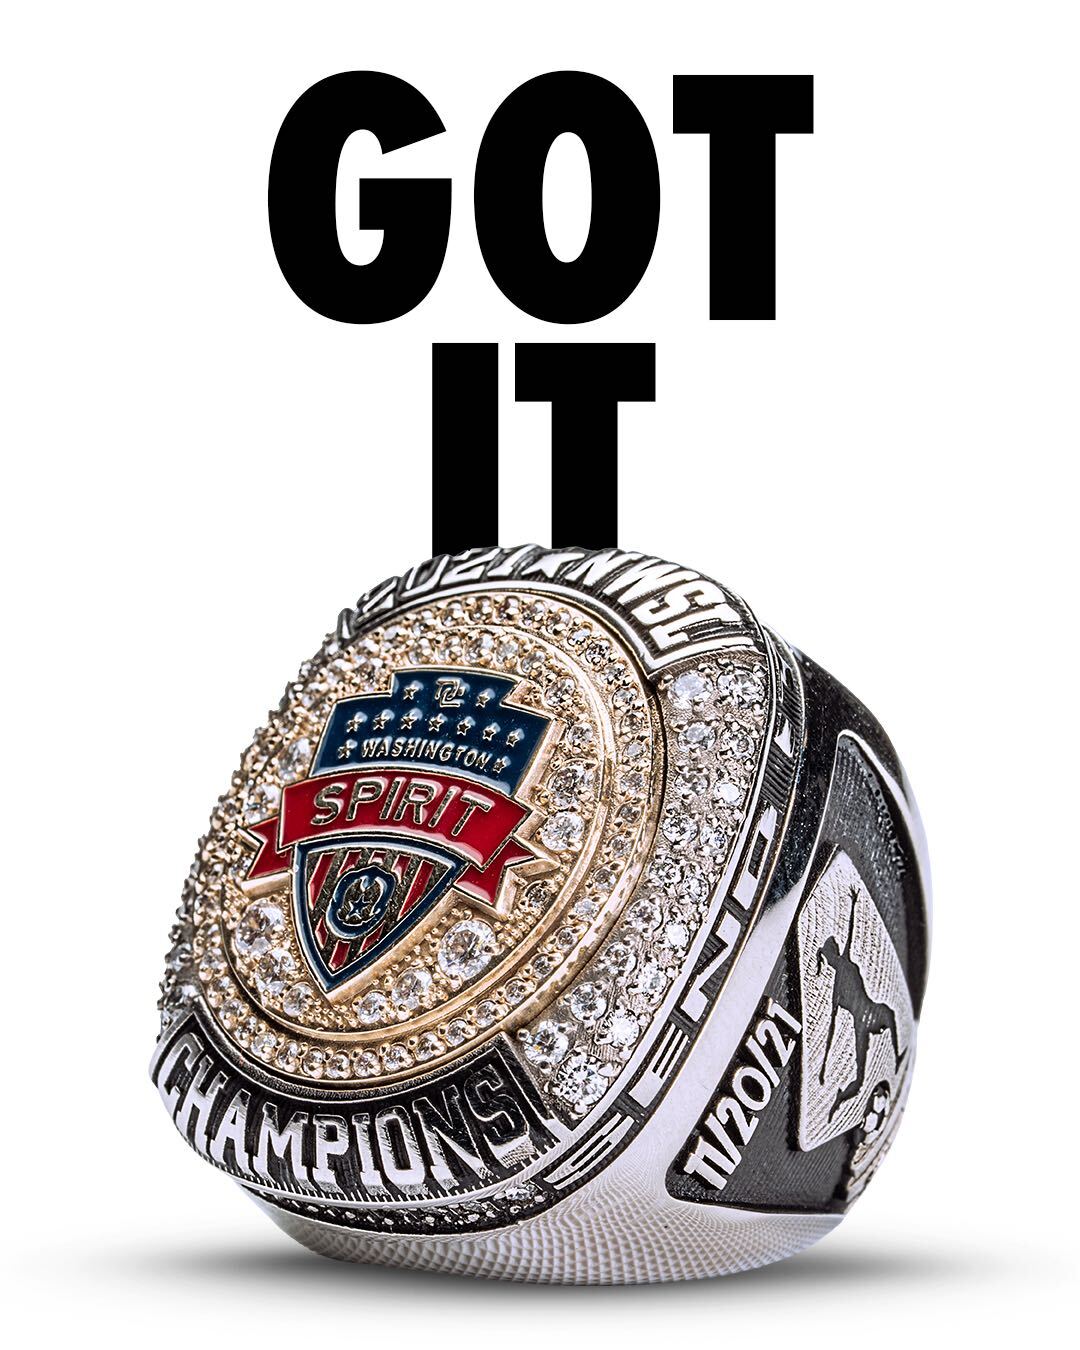 Washington Spirit Announce Winners of Championship Ring Giveaway Featured Image